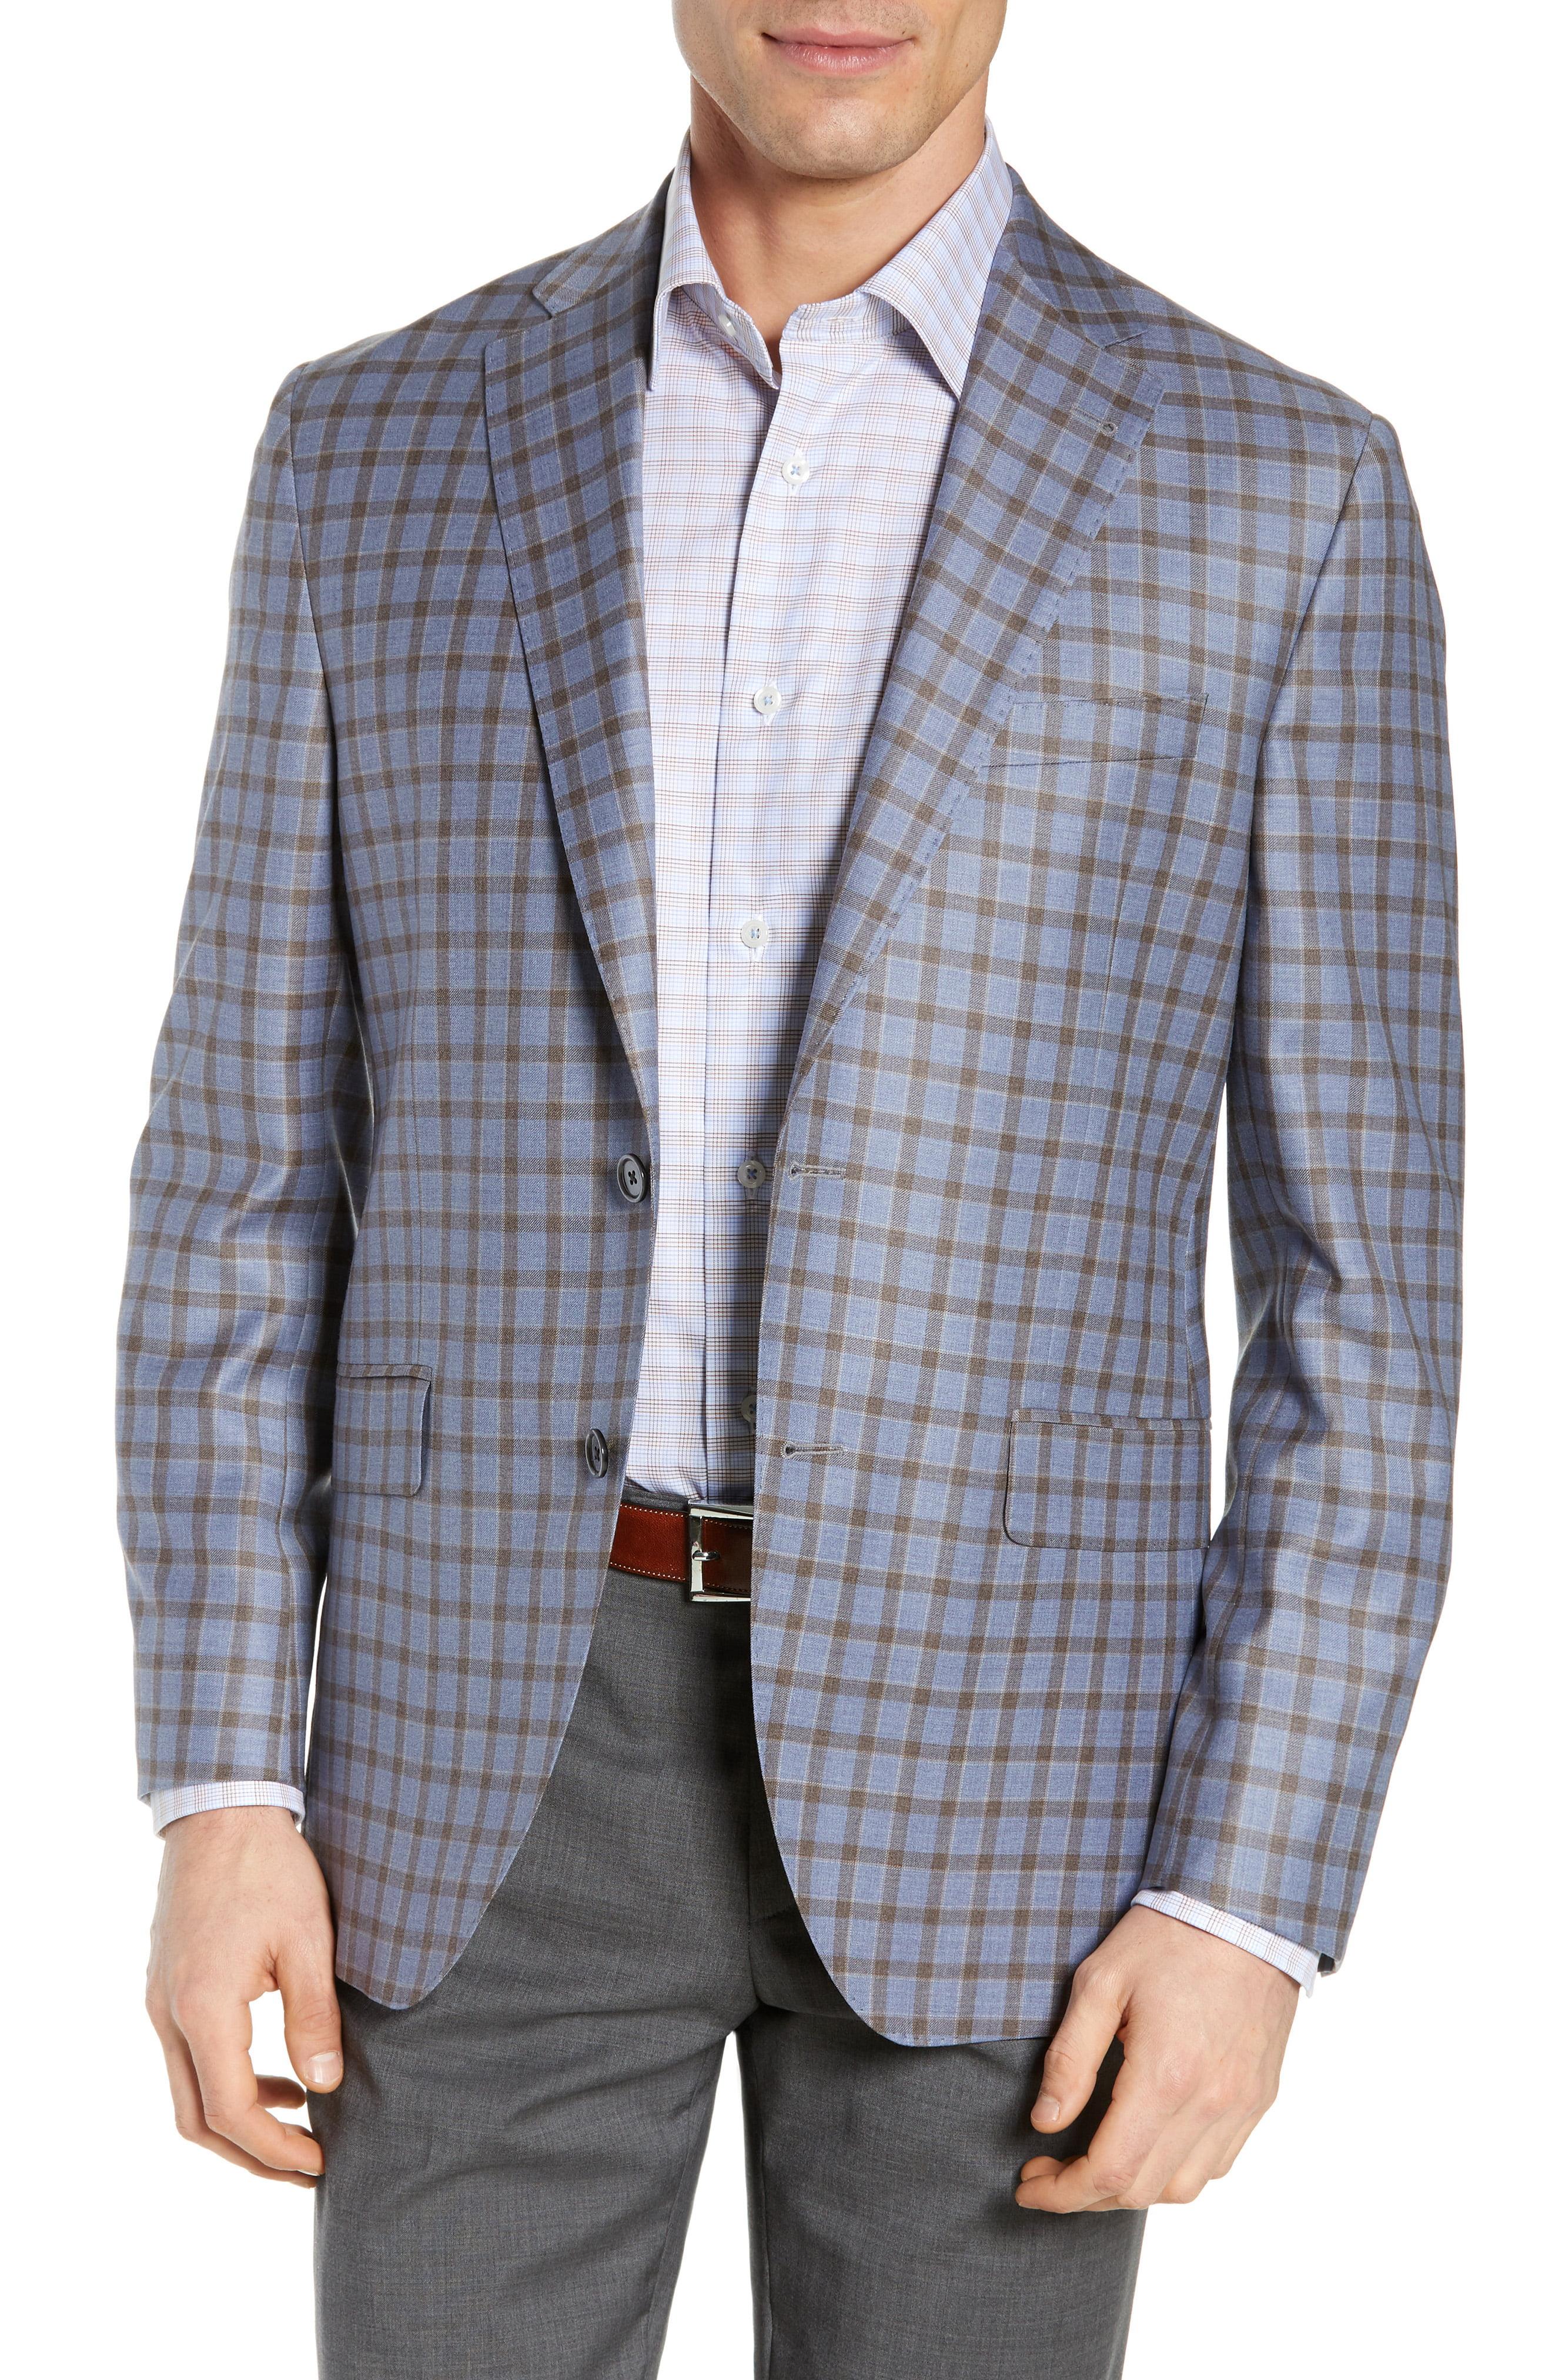 Lyst - David Donahue Ashton Classic Fit Check Wool Sport Coat in Blue ...